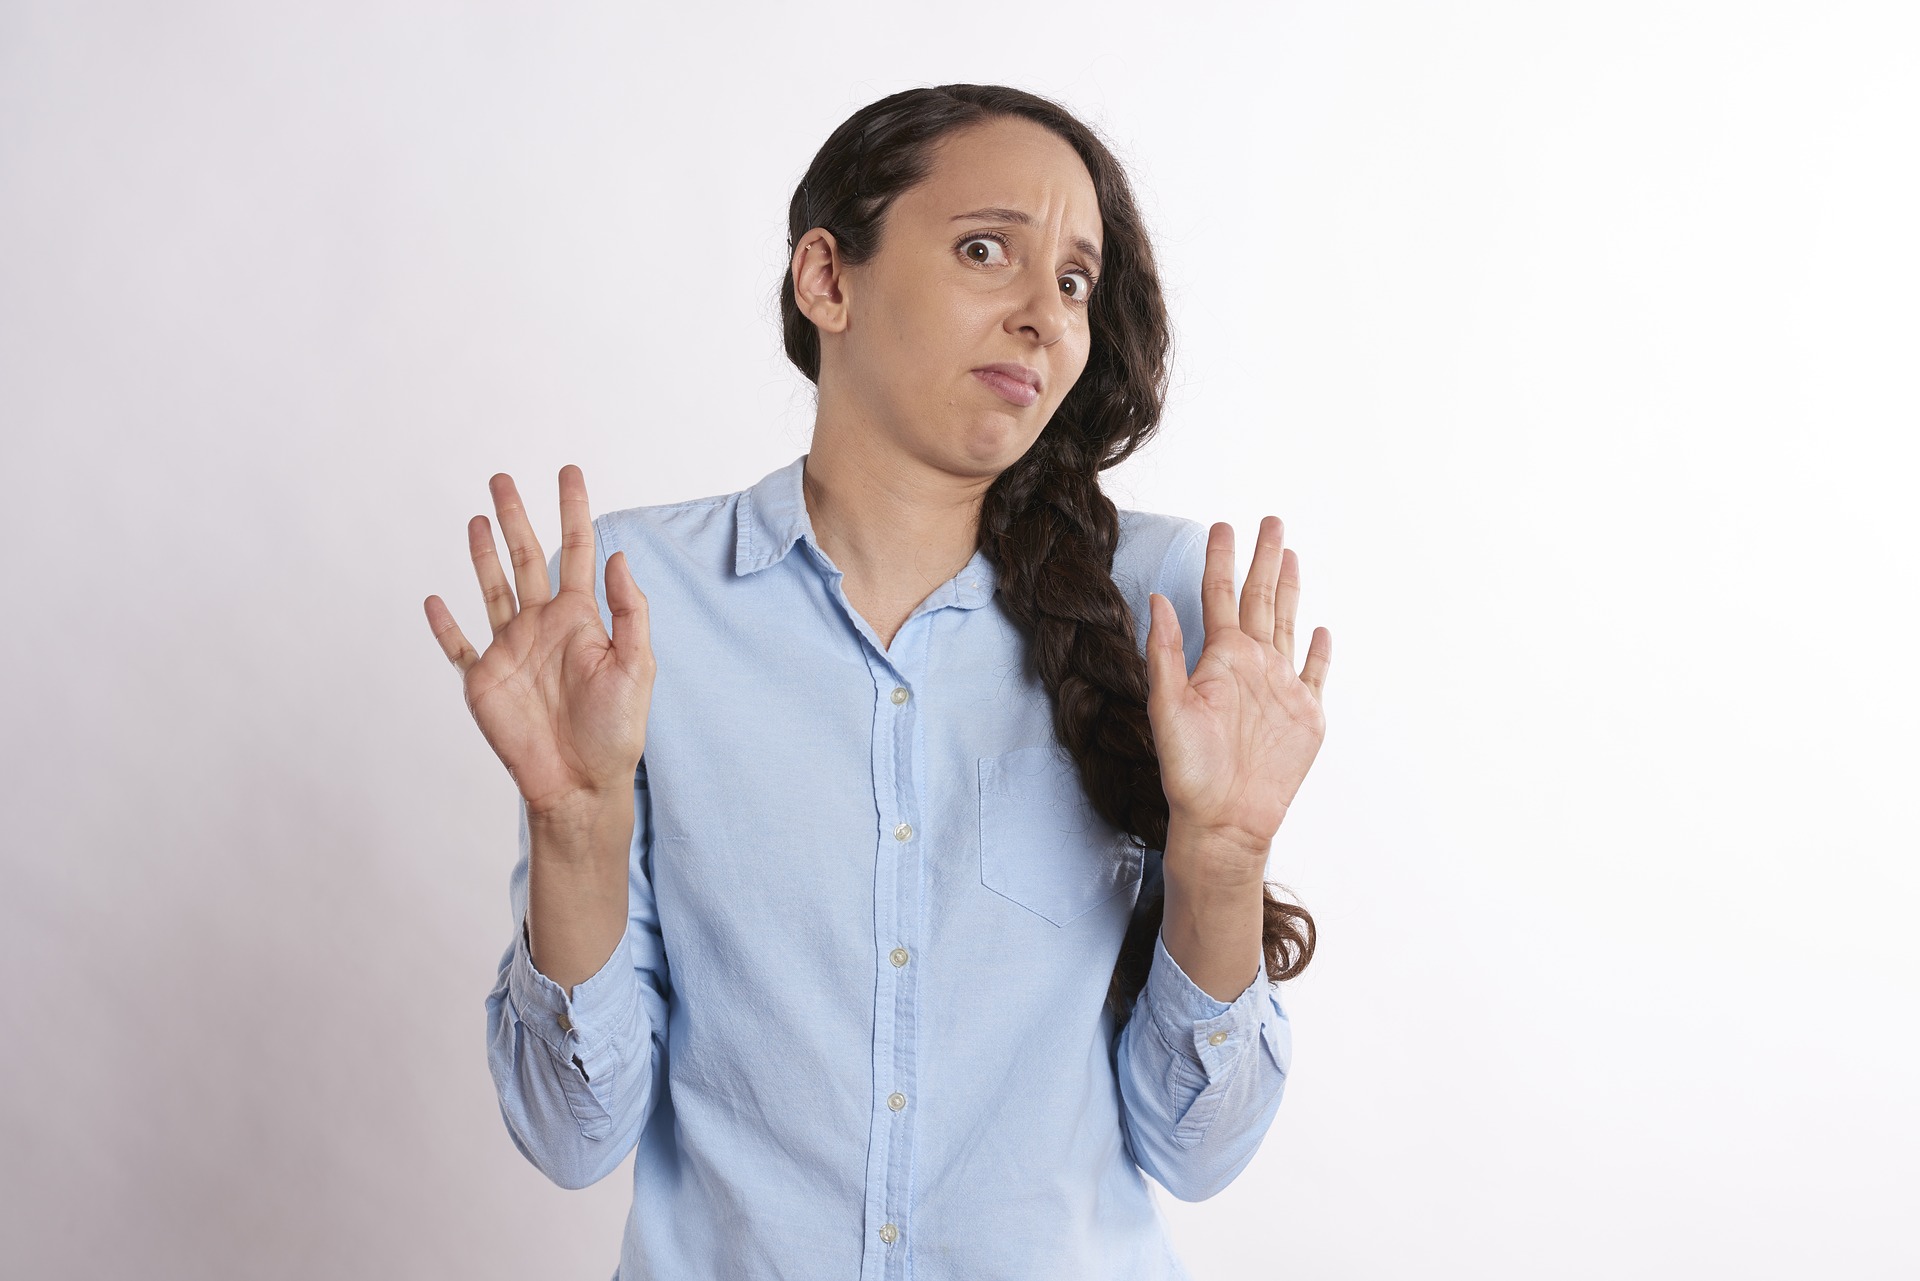 woman shying away with both hands up and uncomfortable expression